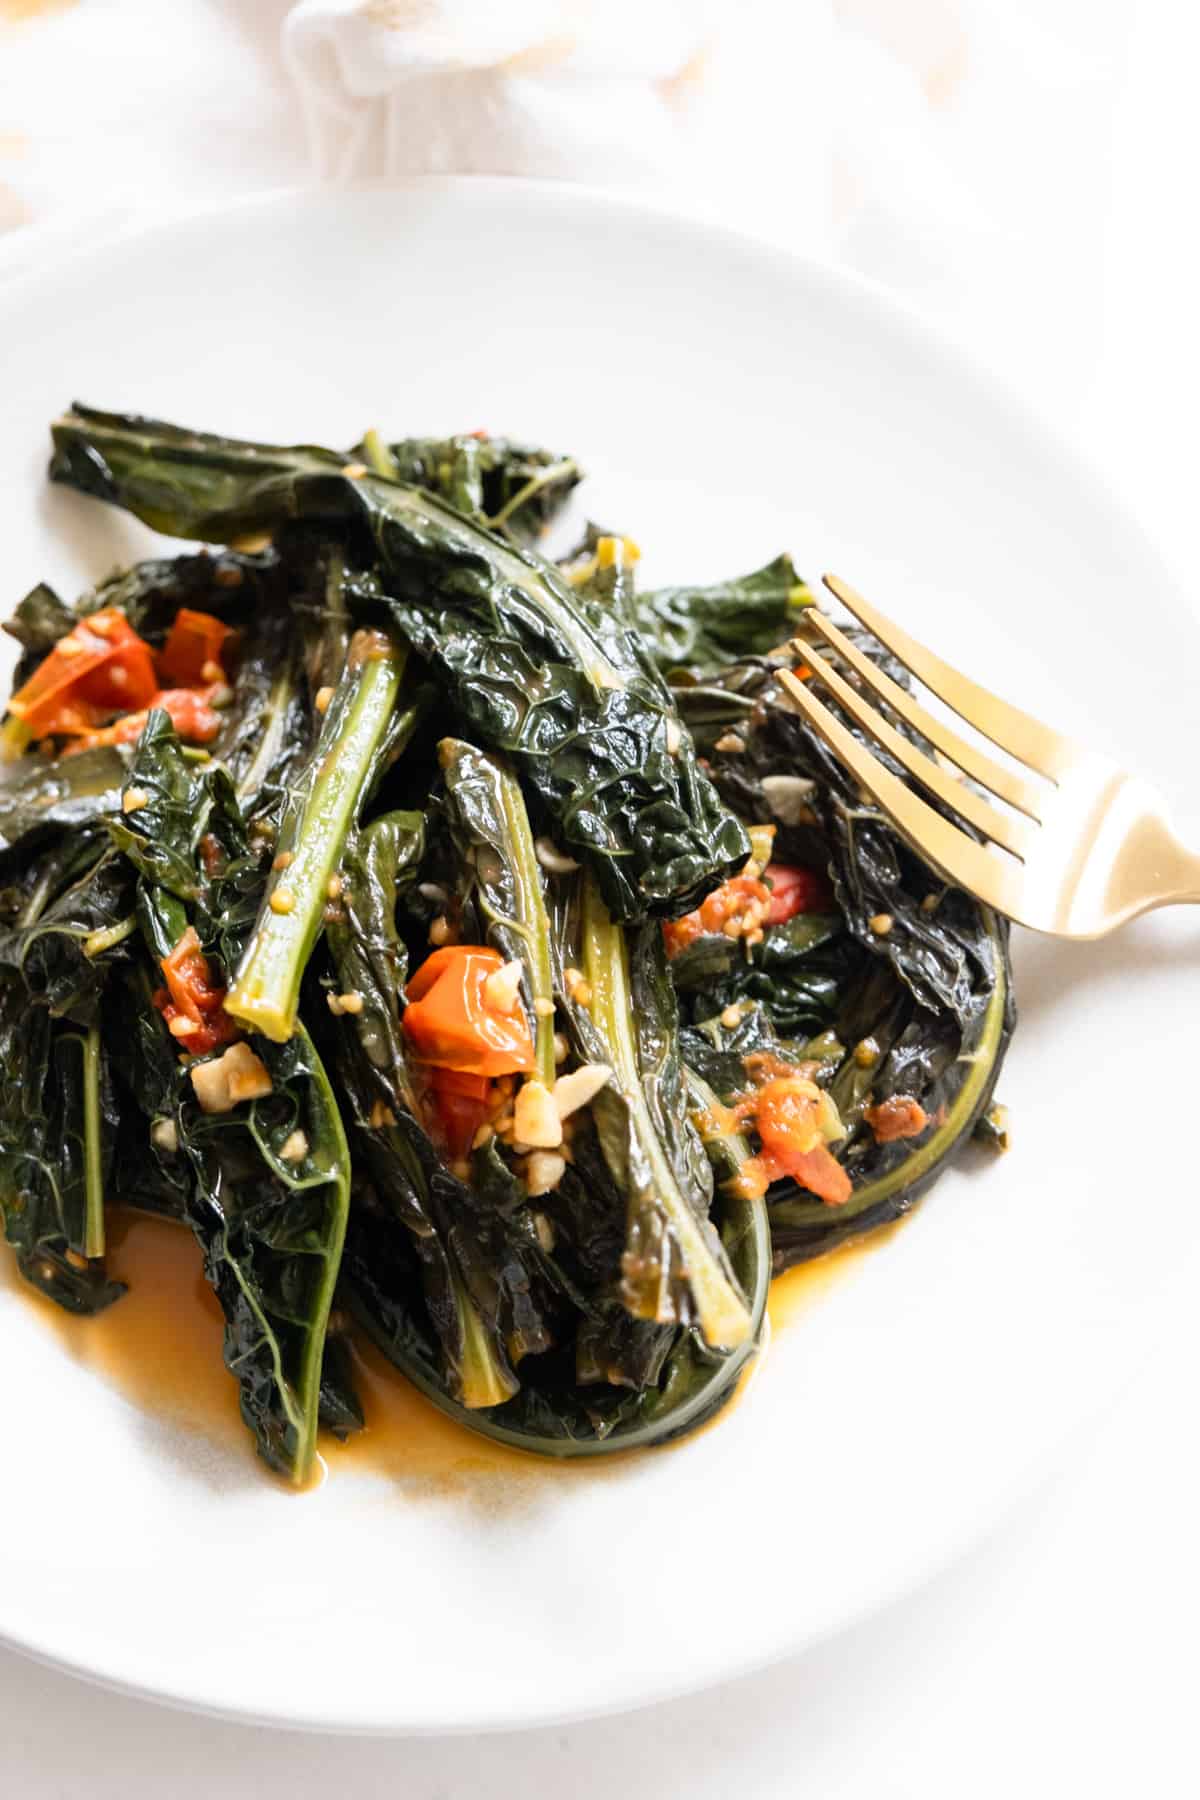 finished lacinato kale recipe braised with cherry tomatoes and garlic